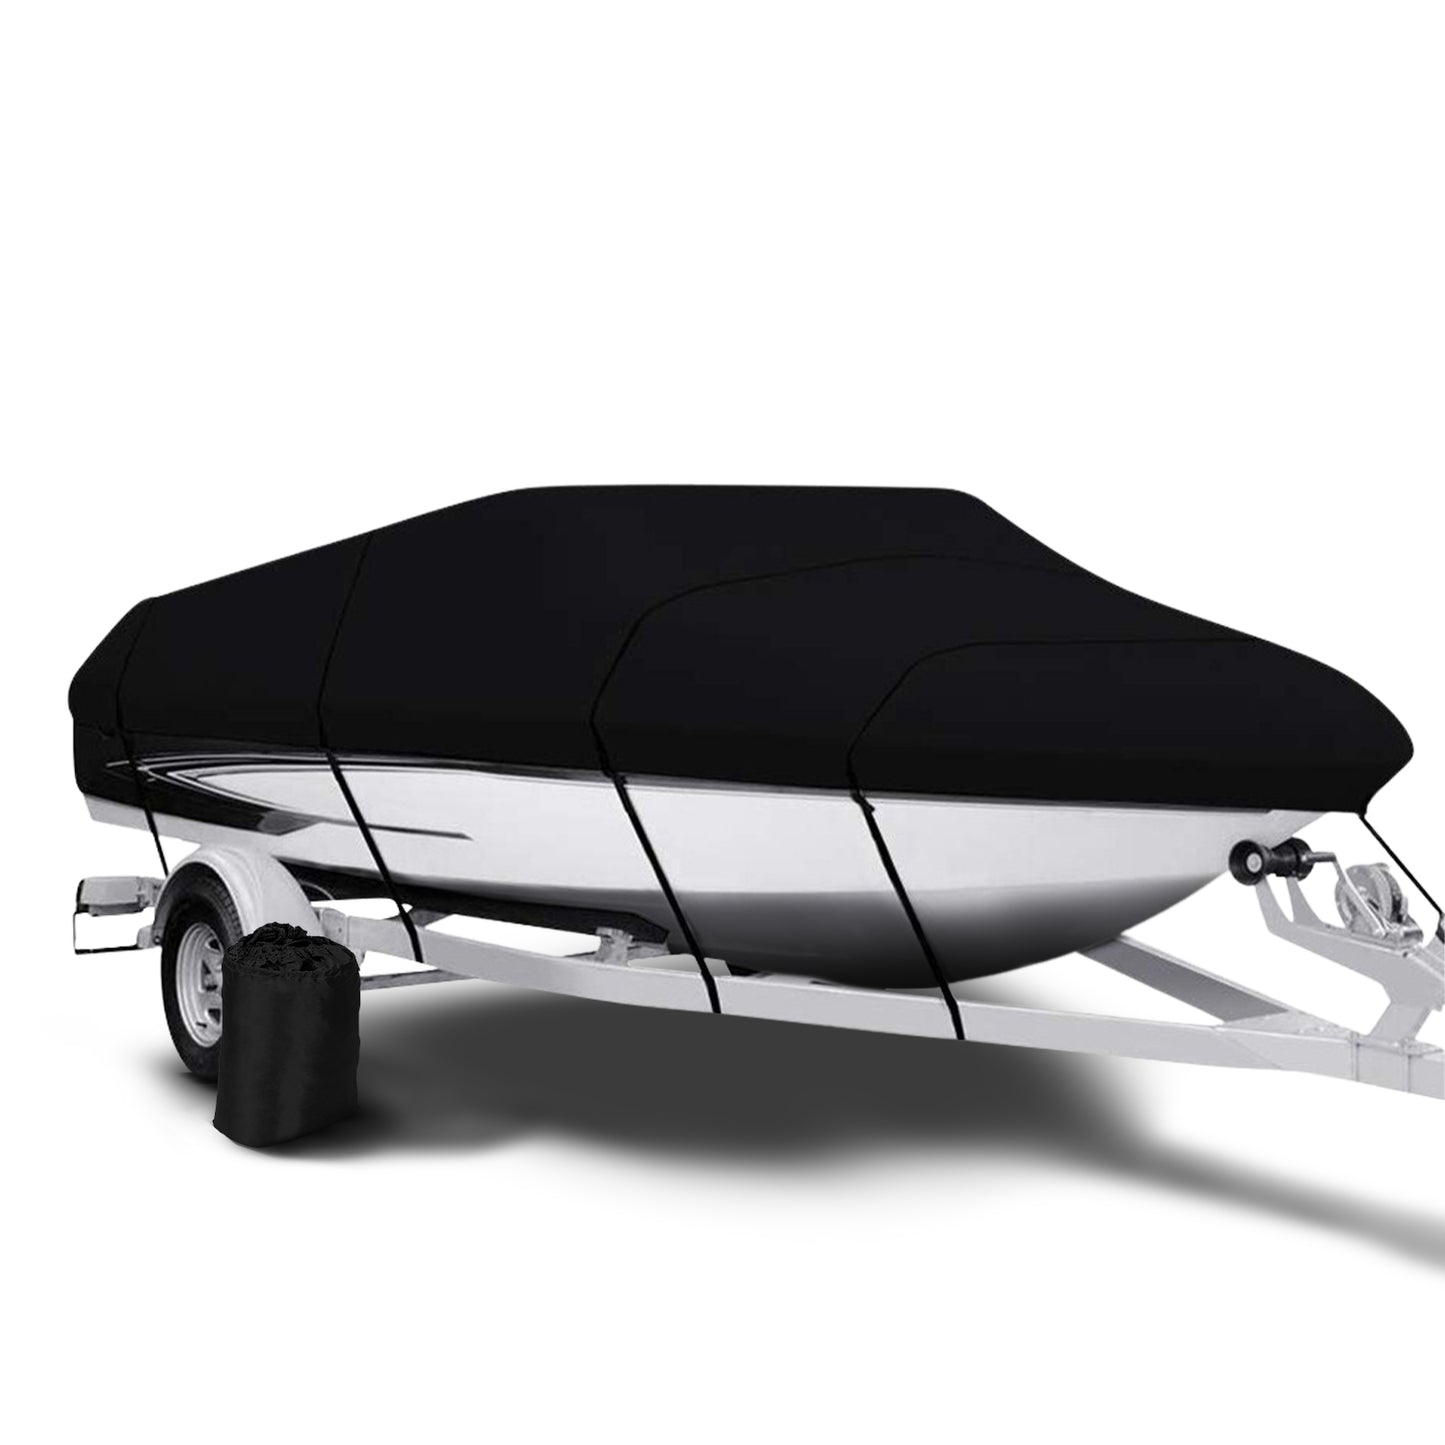 Black Waterproof Boat Cover for 14-16 FT Watercraft